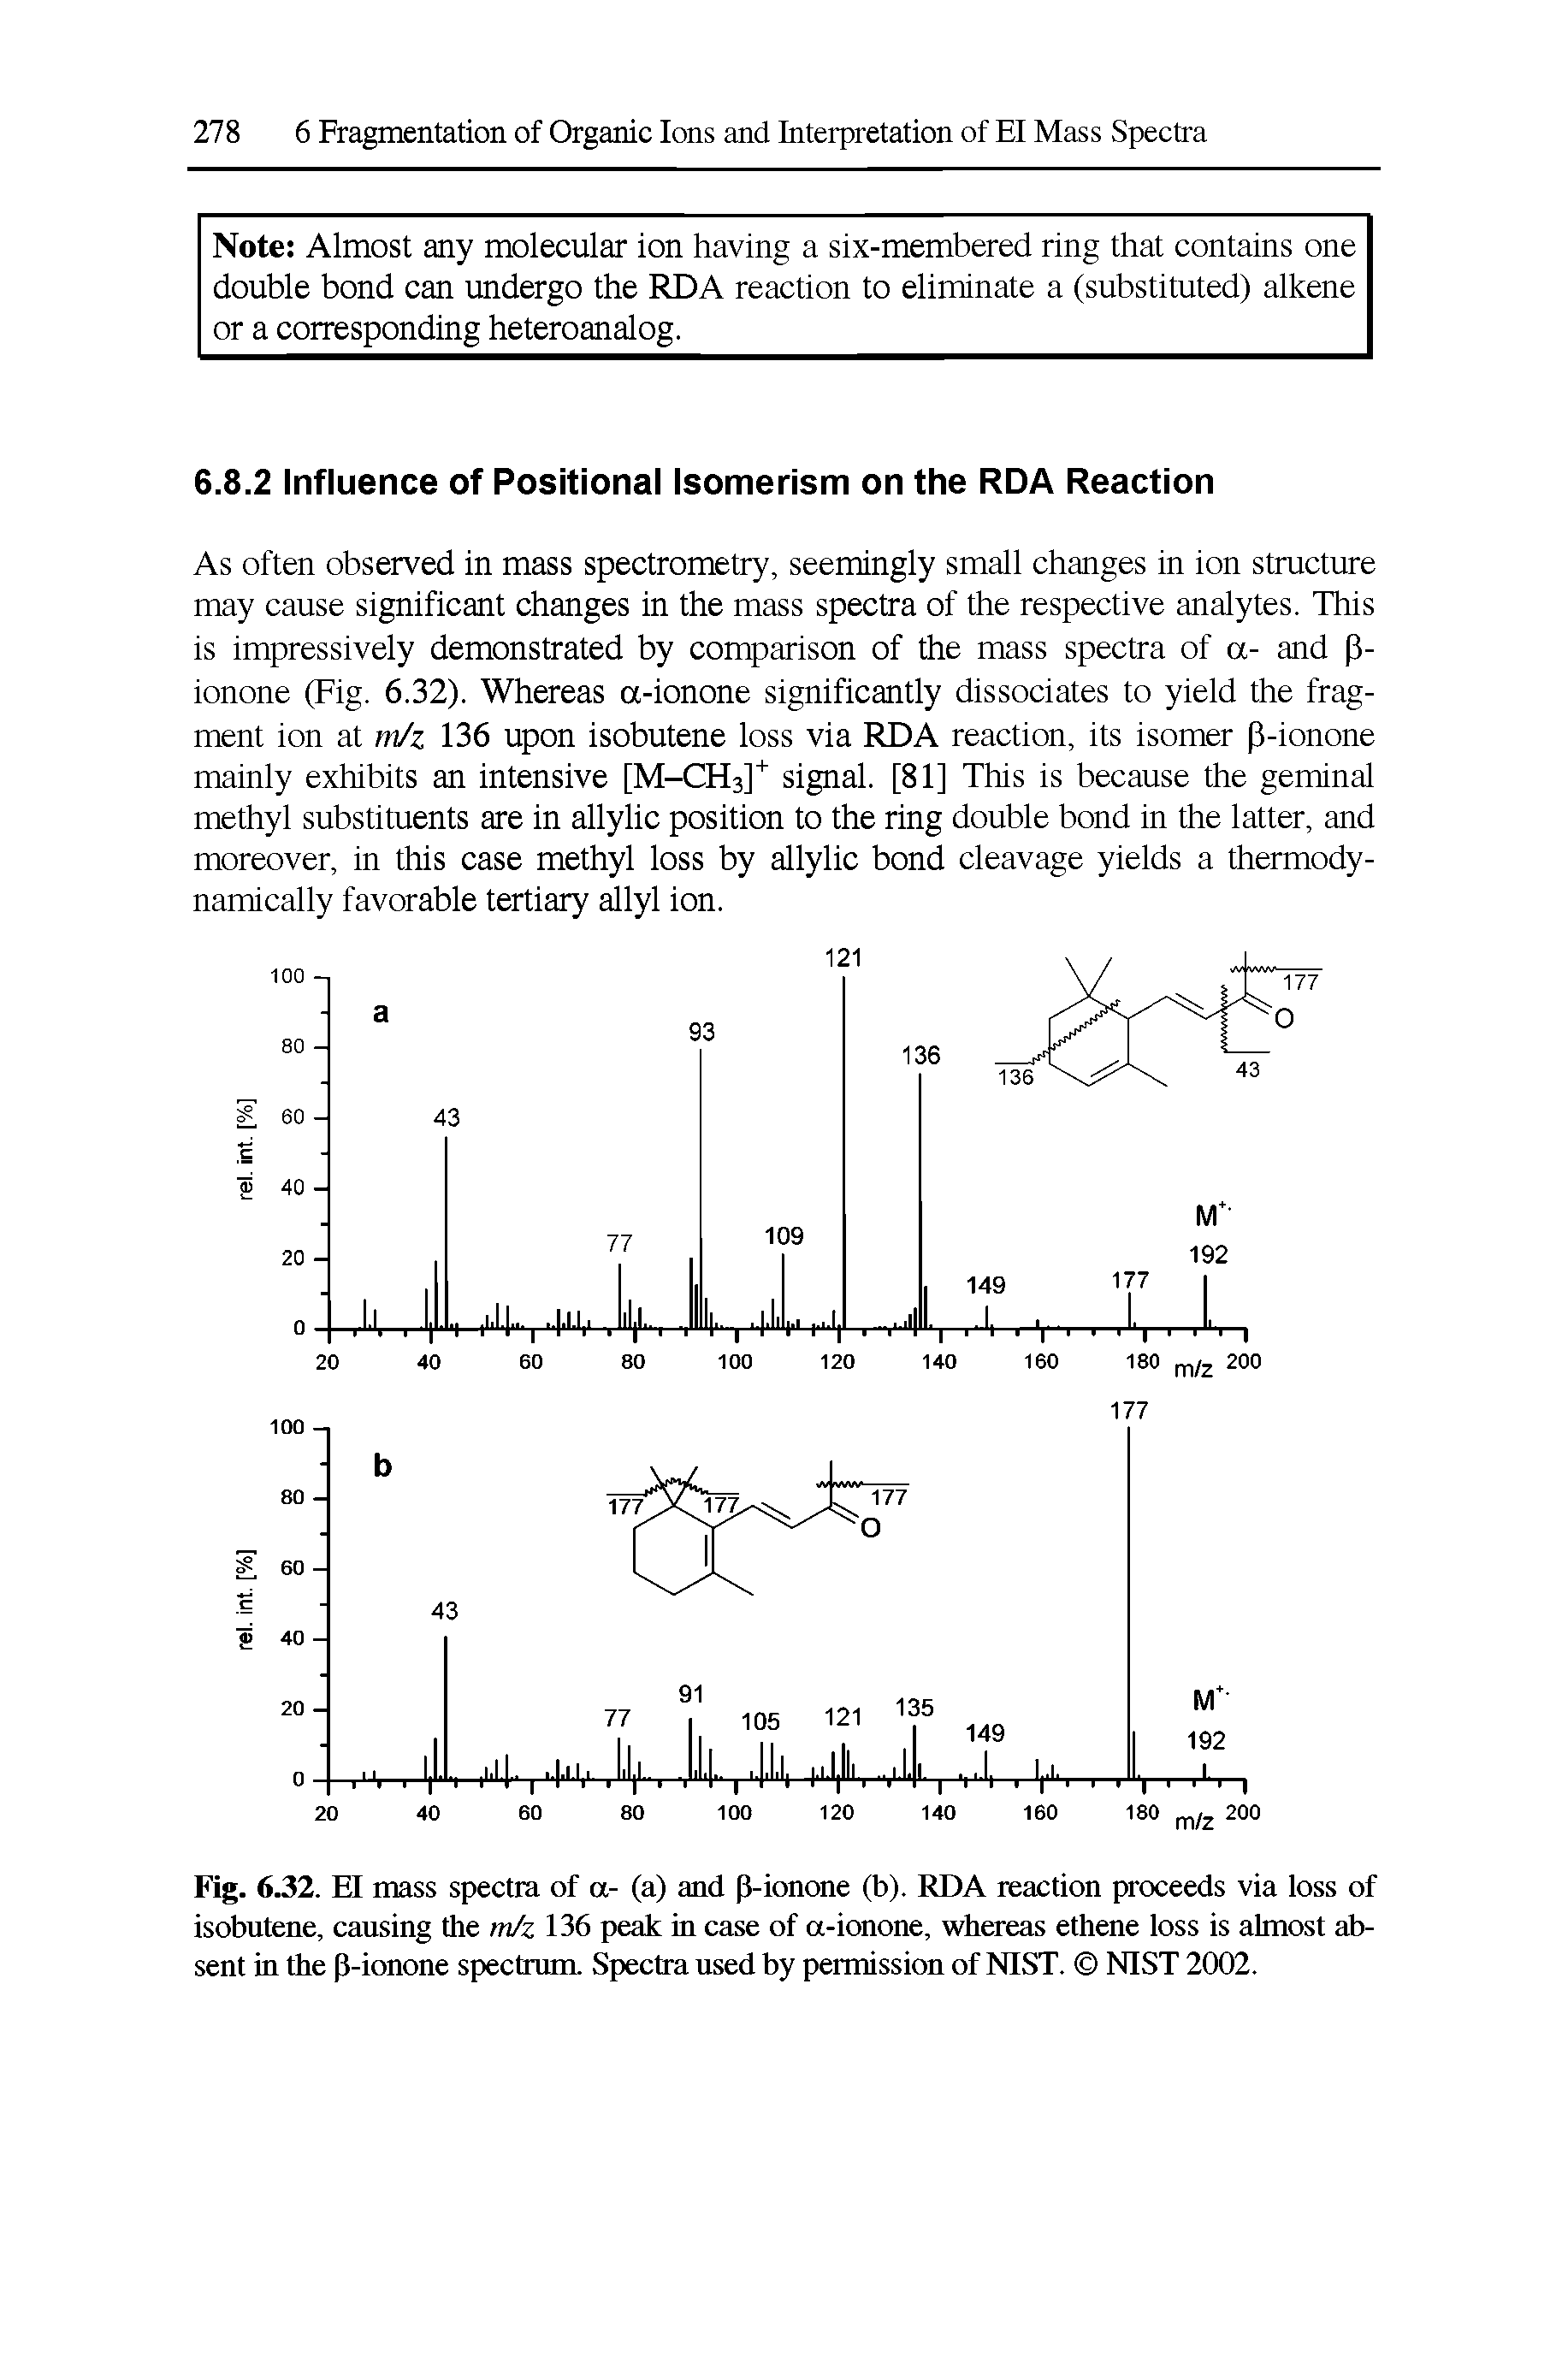 Fig. 6.32. El mass spectra of a- (a) and P-ionone (b). RDA reaction proceeds via loss of isobutene, causing the m/z 136 peak in case of a-ionone, whereas ethene loss is almost absent in the P-ionone spectrum. Spectra used by permission of NIST. NIST 2002.